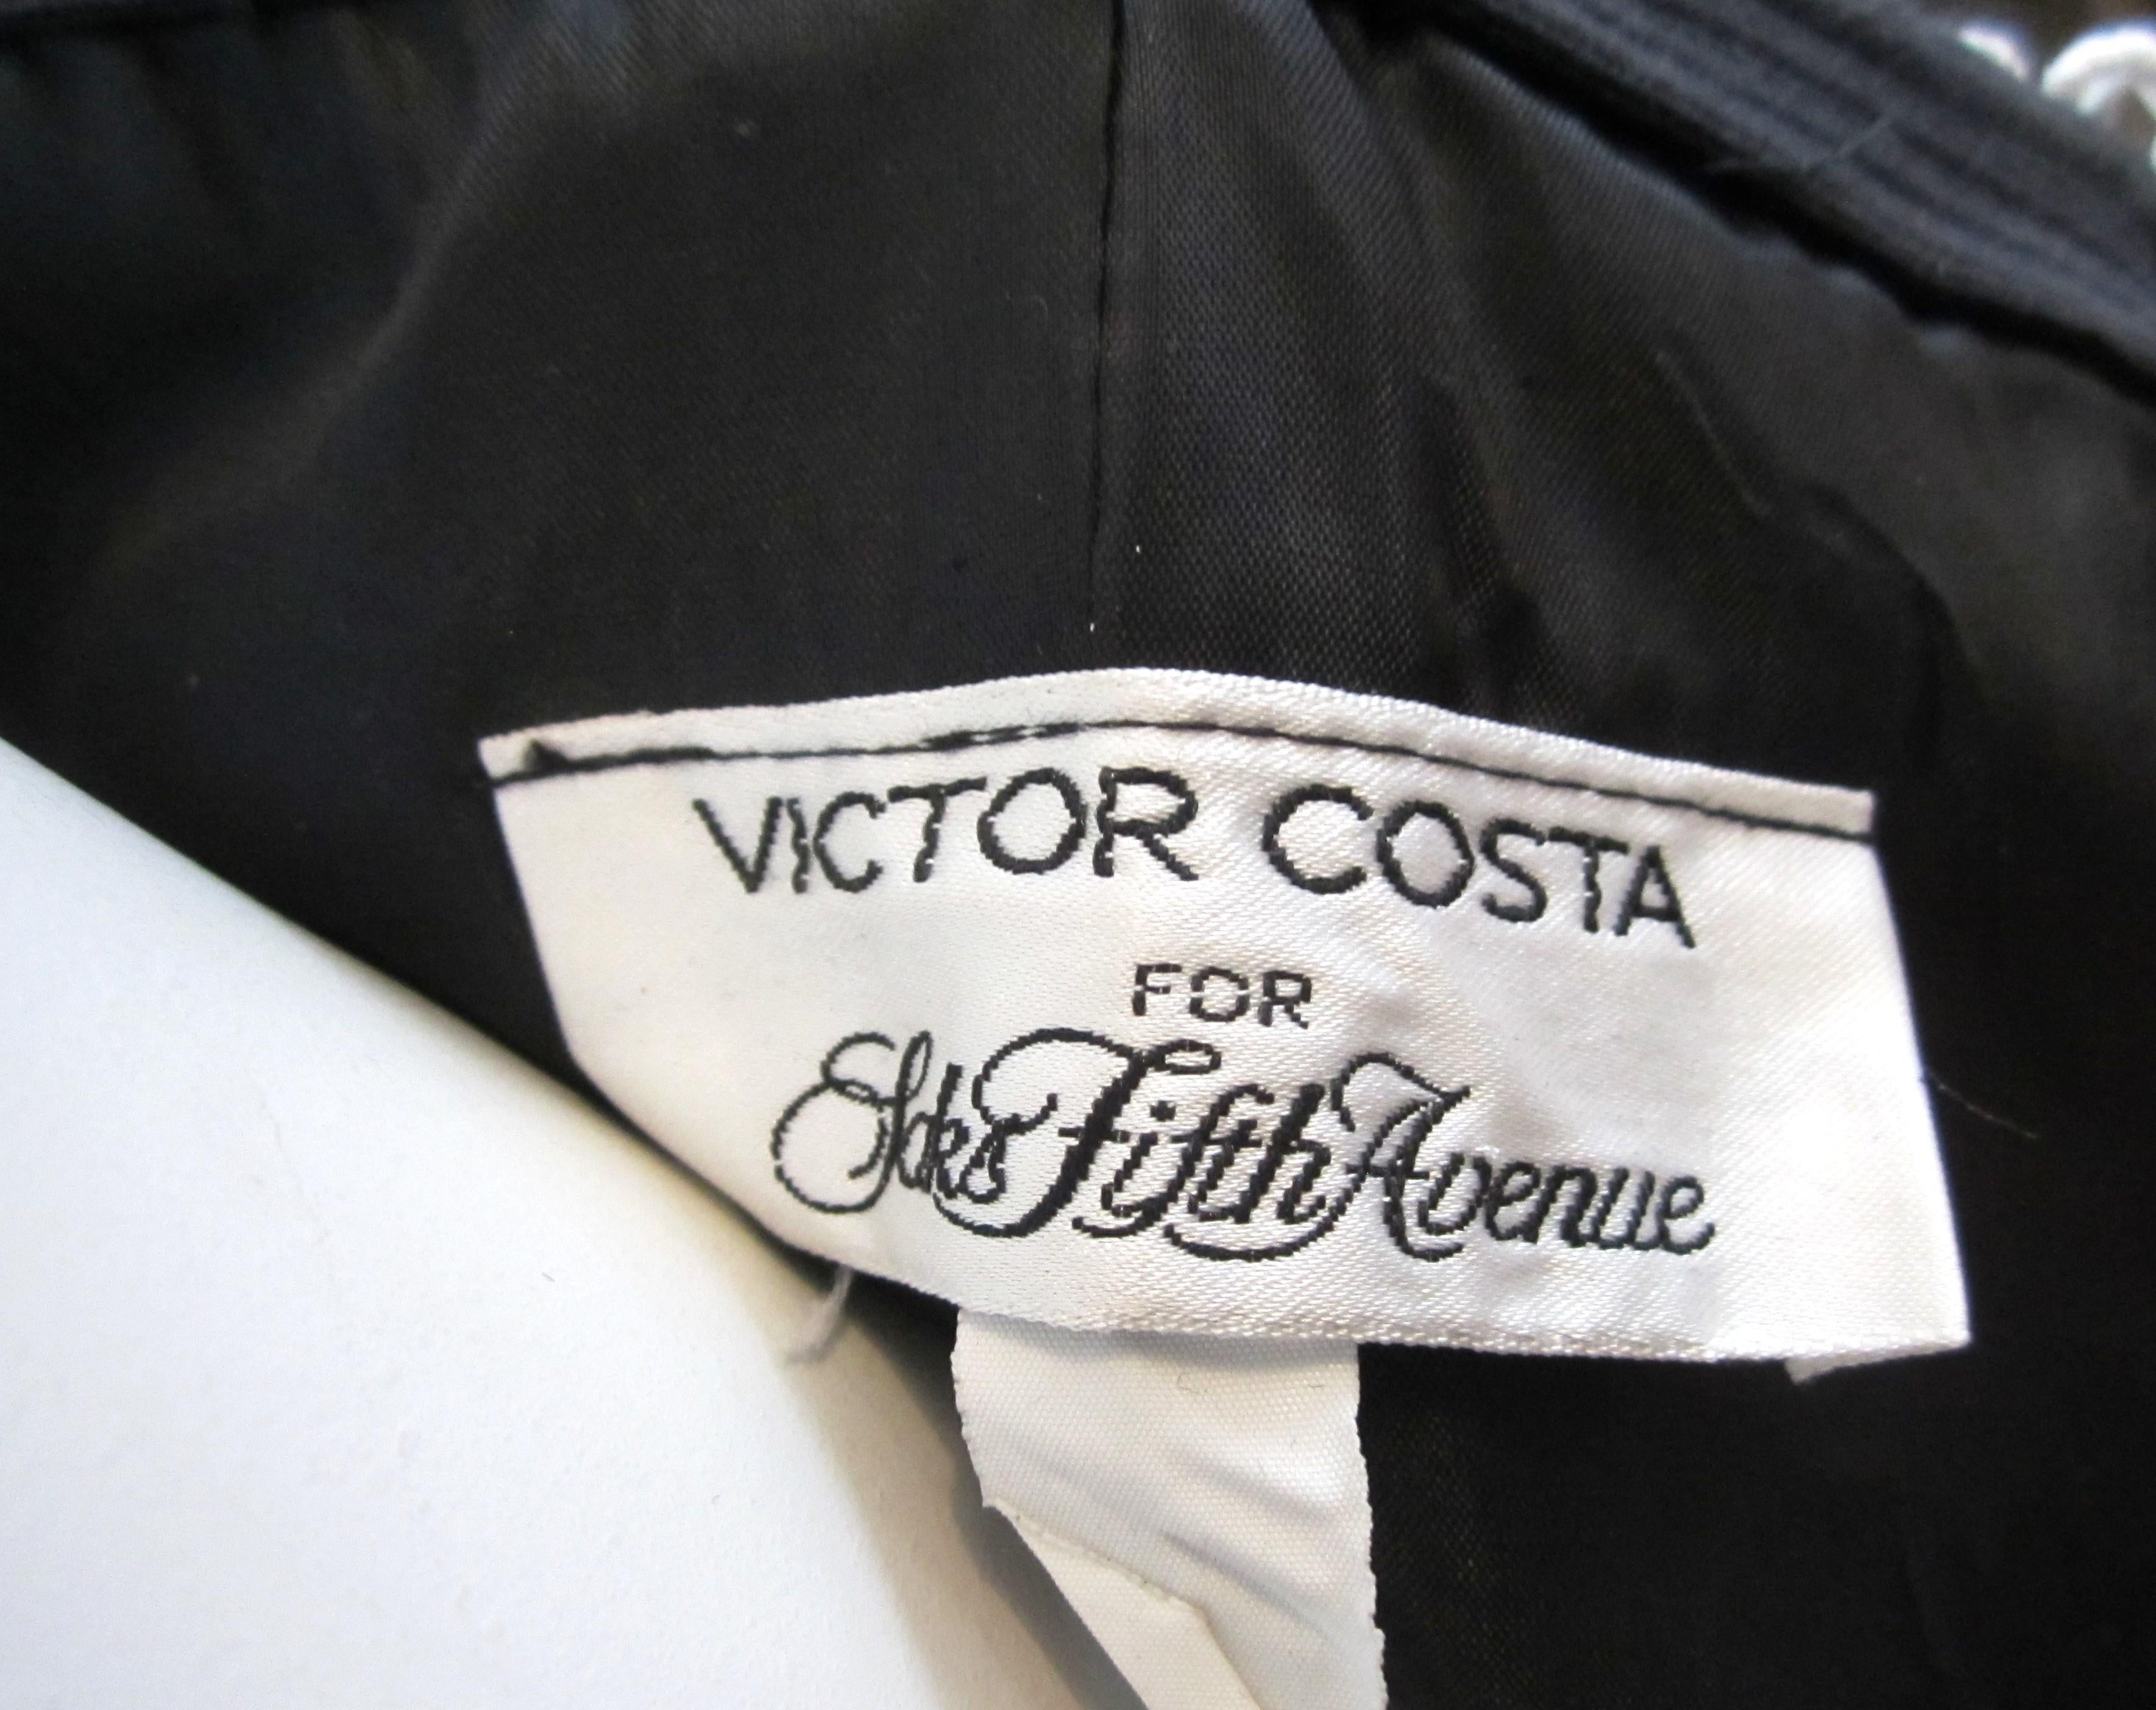  Victor Costa Black & White Strapless Cocktail Dress, 1980s  For Sale 5